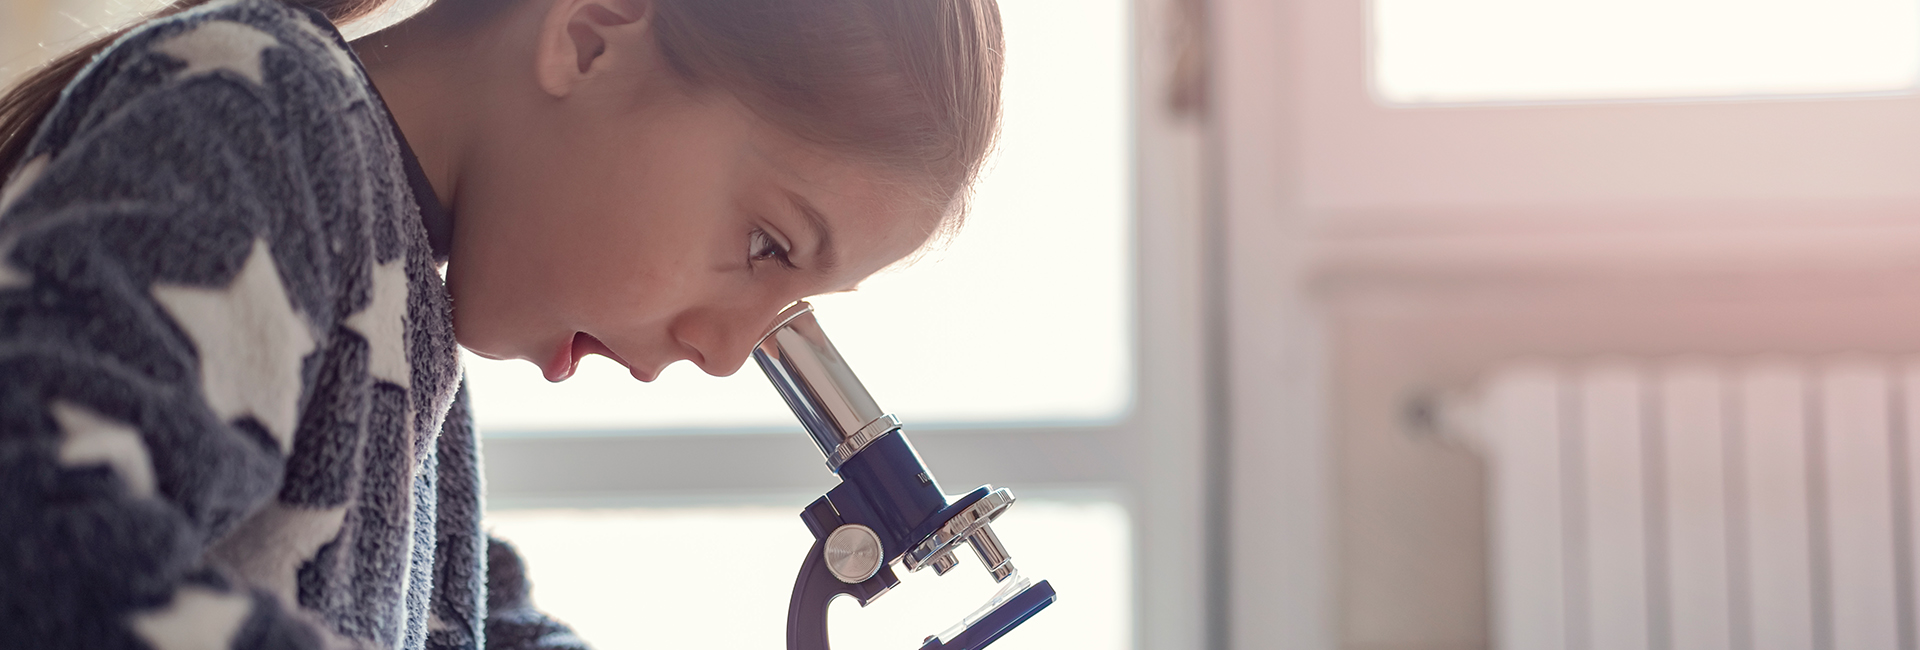 Little girl looking into a microscope